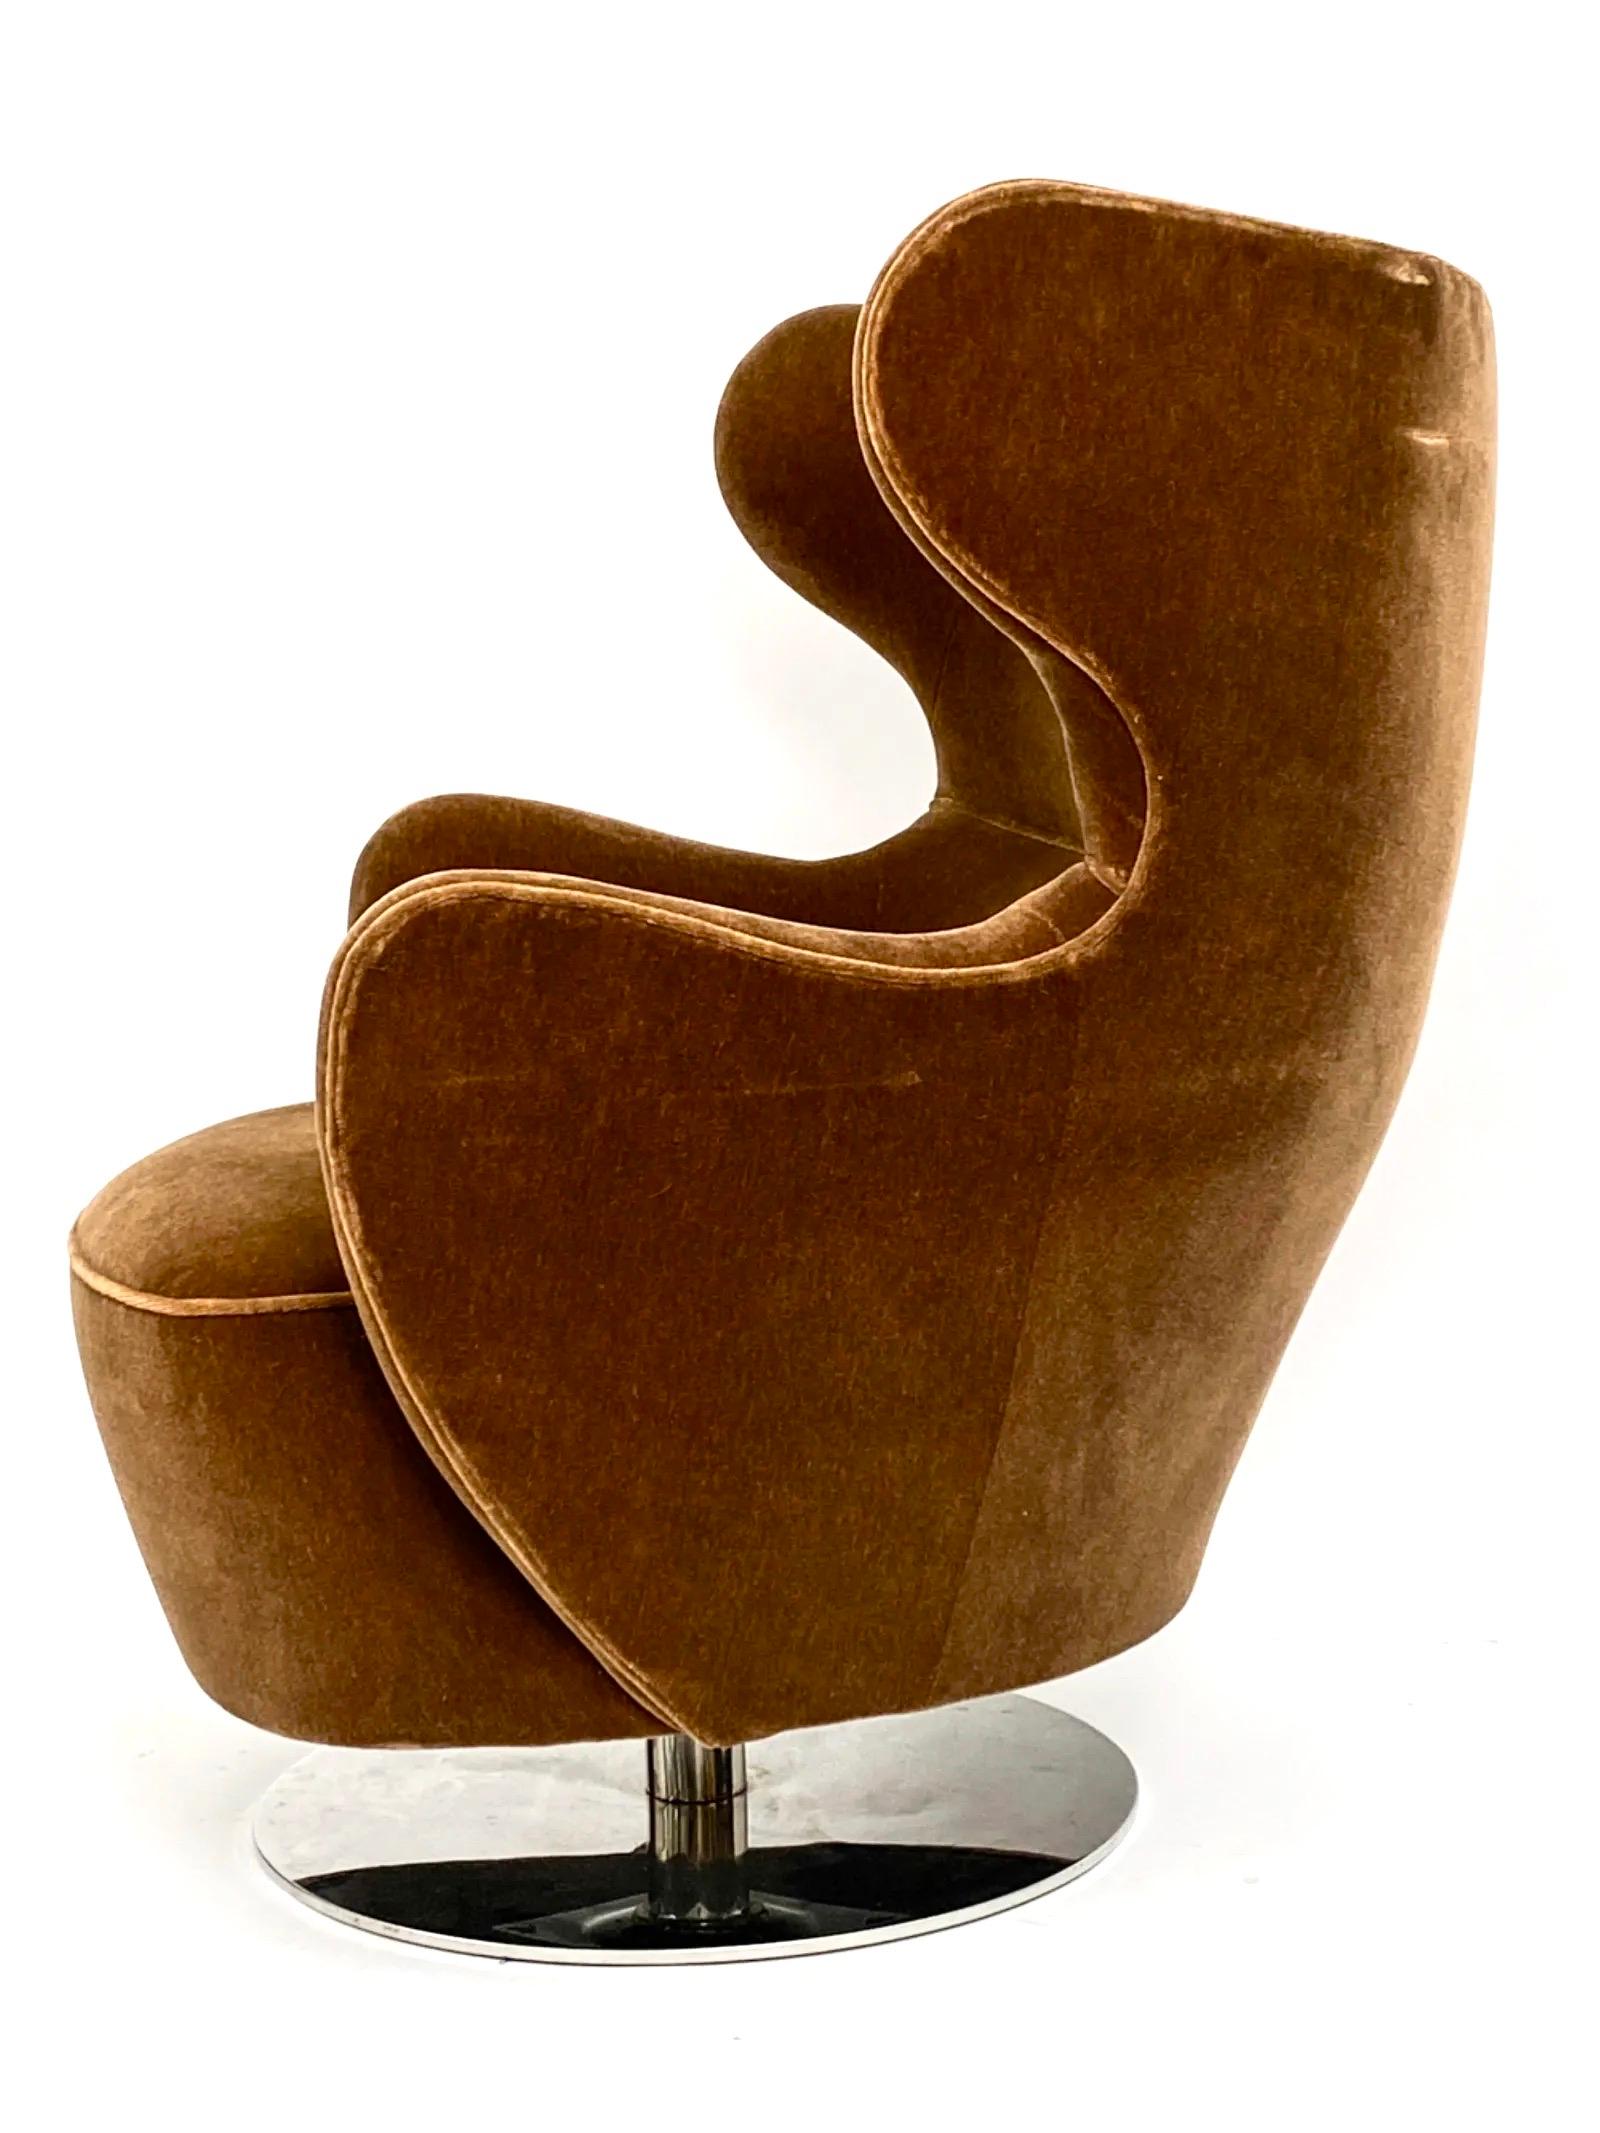 Vladimir Kagan Mohair Wing Chair 100c-S, Polished Nickel Swivel Base, Holly Hunt In Good Condition For Sale In Brooklyn, NY